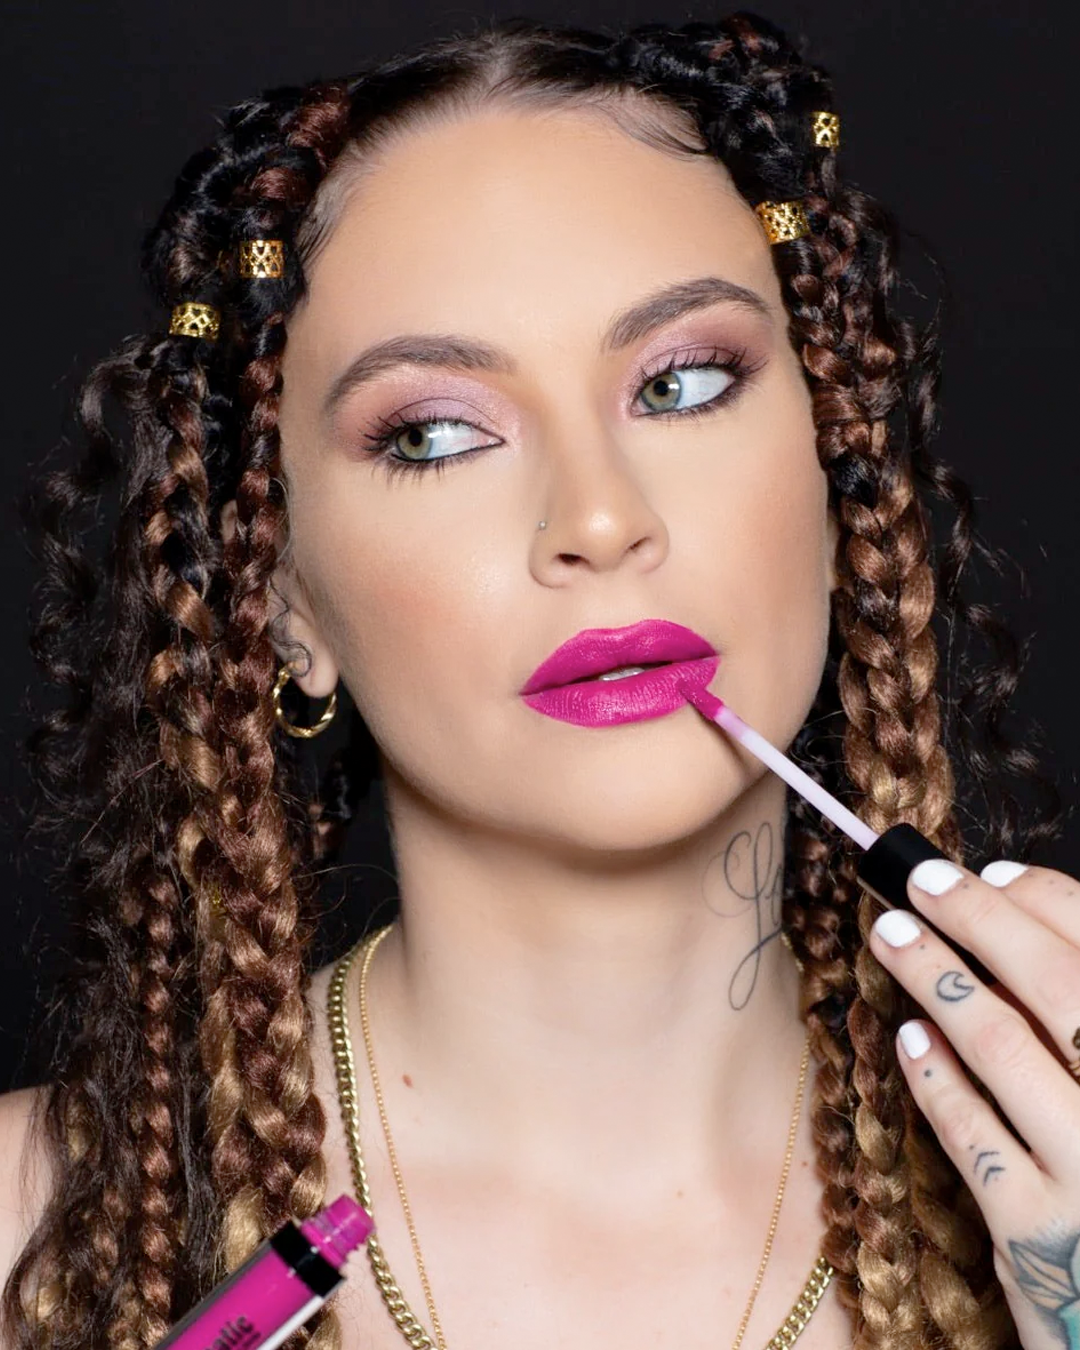 Model wearing Juice Liquid Matte LipStick and eyeshadow from The All I Need Eyeshadow Palette.